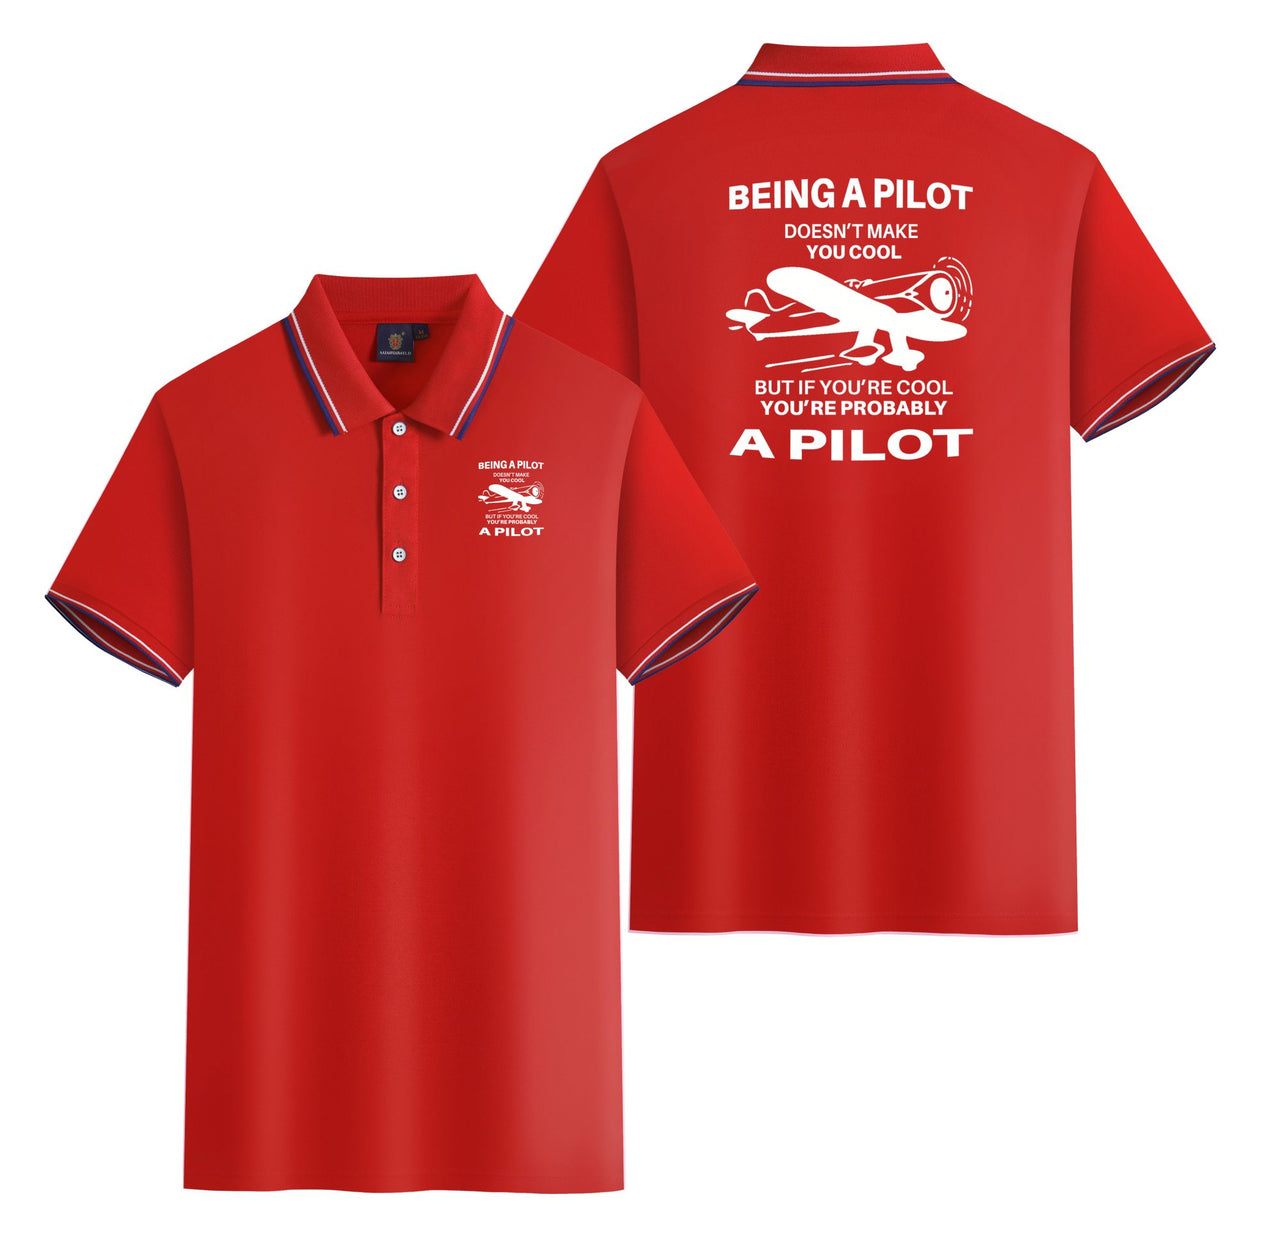 If You're Cool You're Probably a Pilot Designed Stylish Polo T-Shirts (Double-Side)